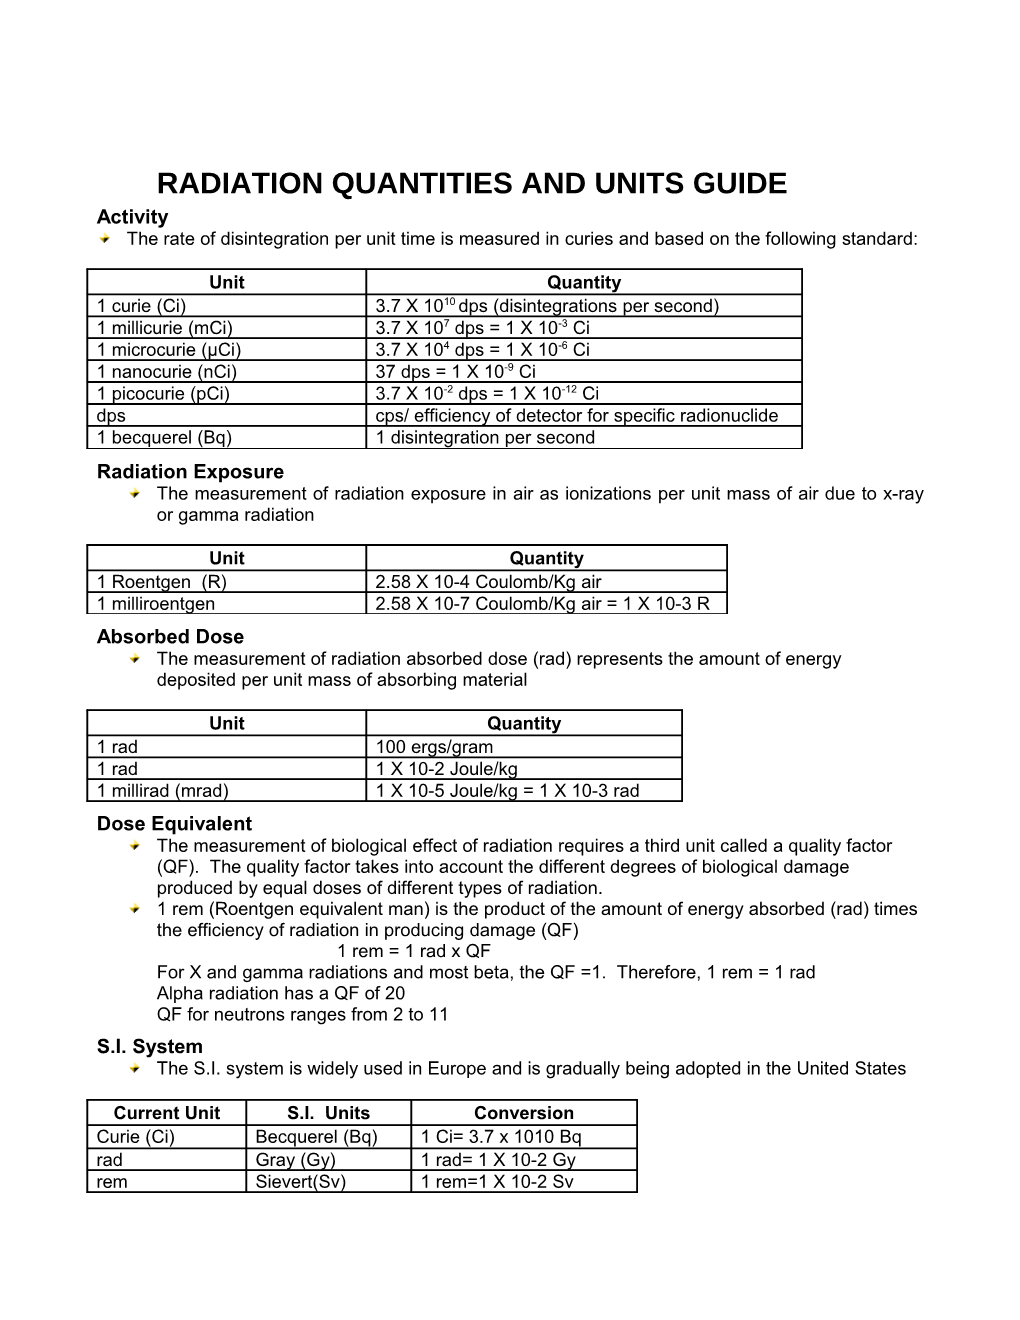 Radiation Quantities and Units Guide